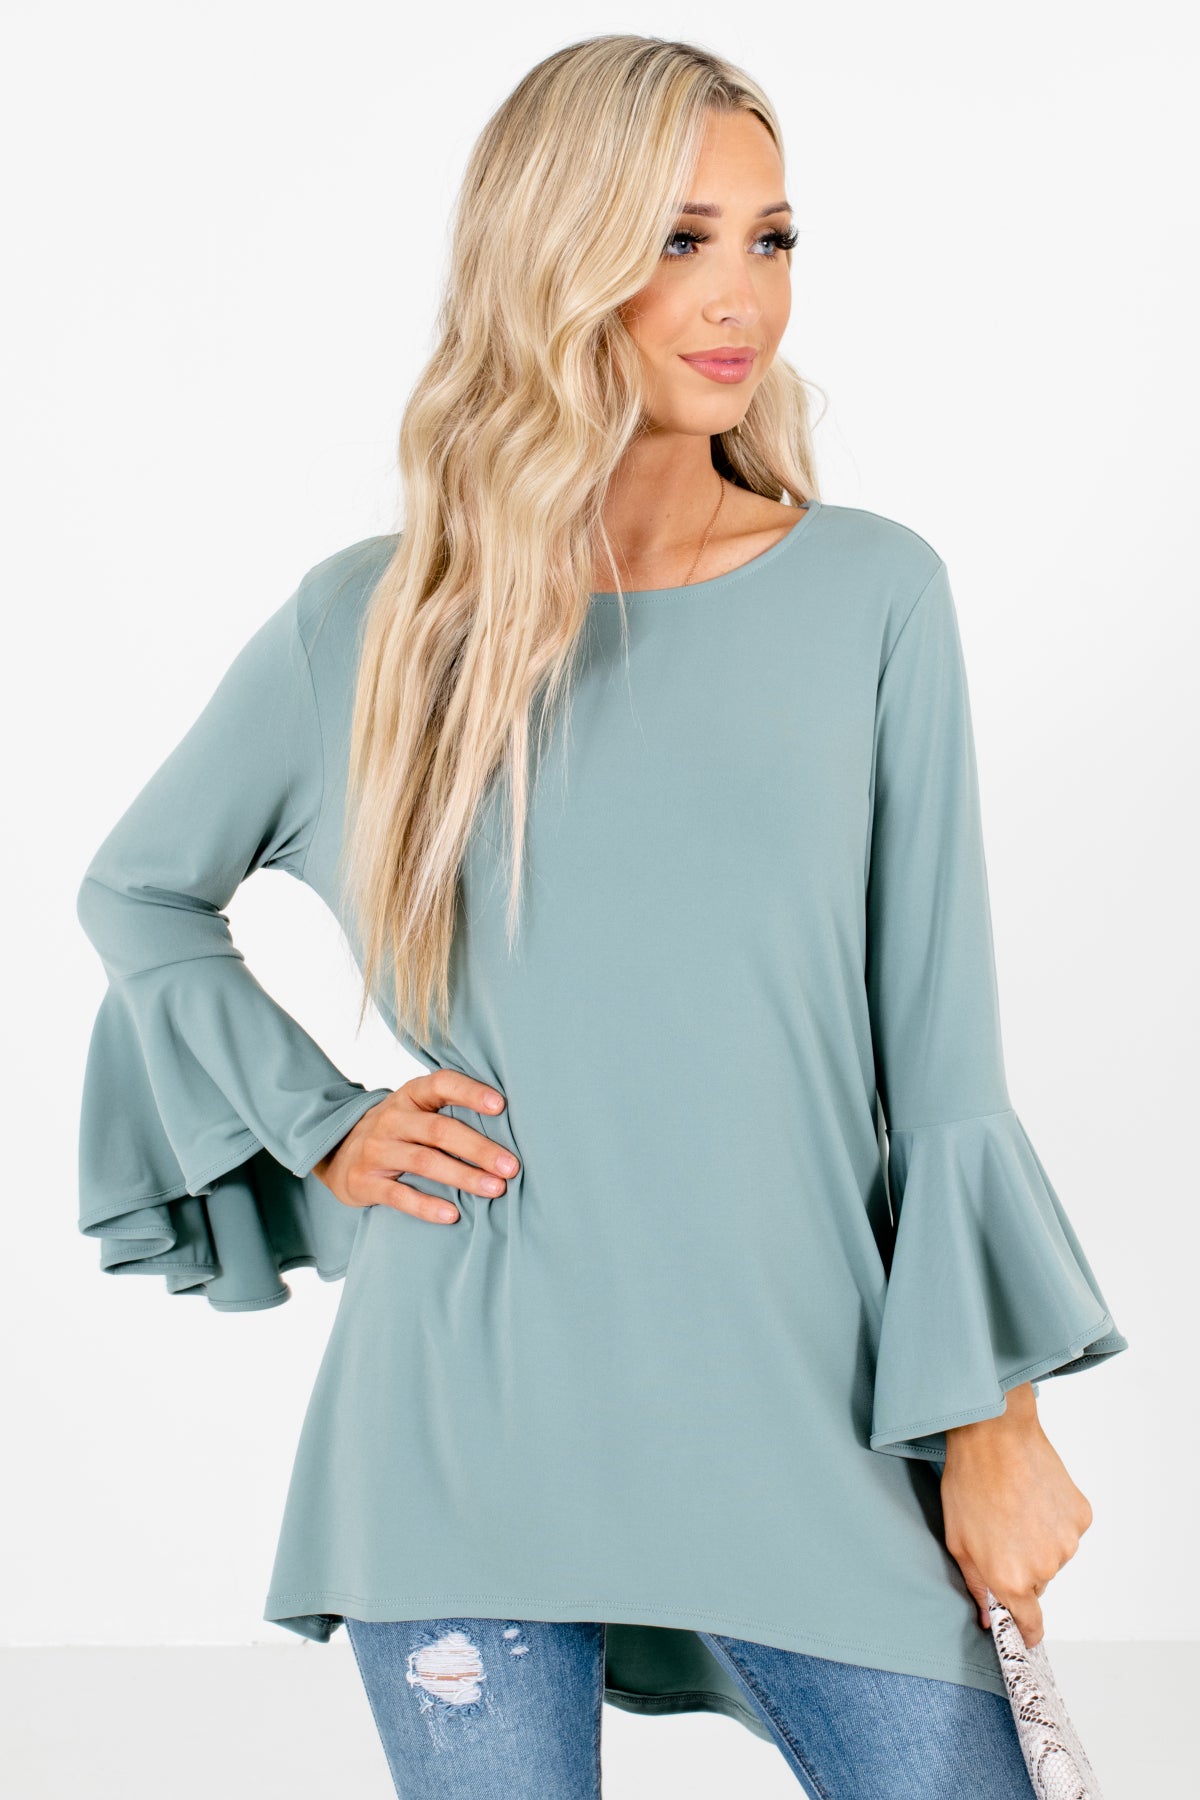 Green Bell Sleeve Style Boutique Blouses for Women